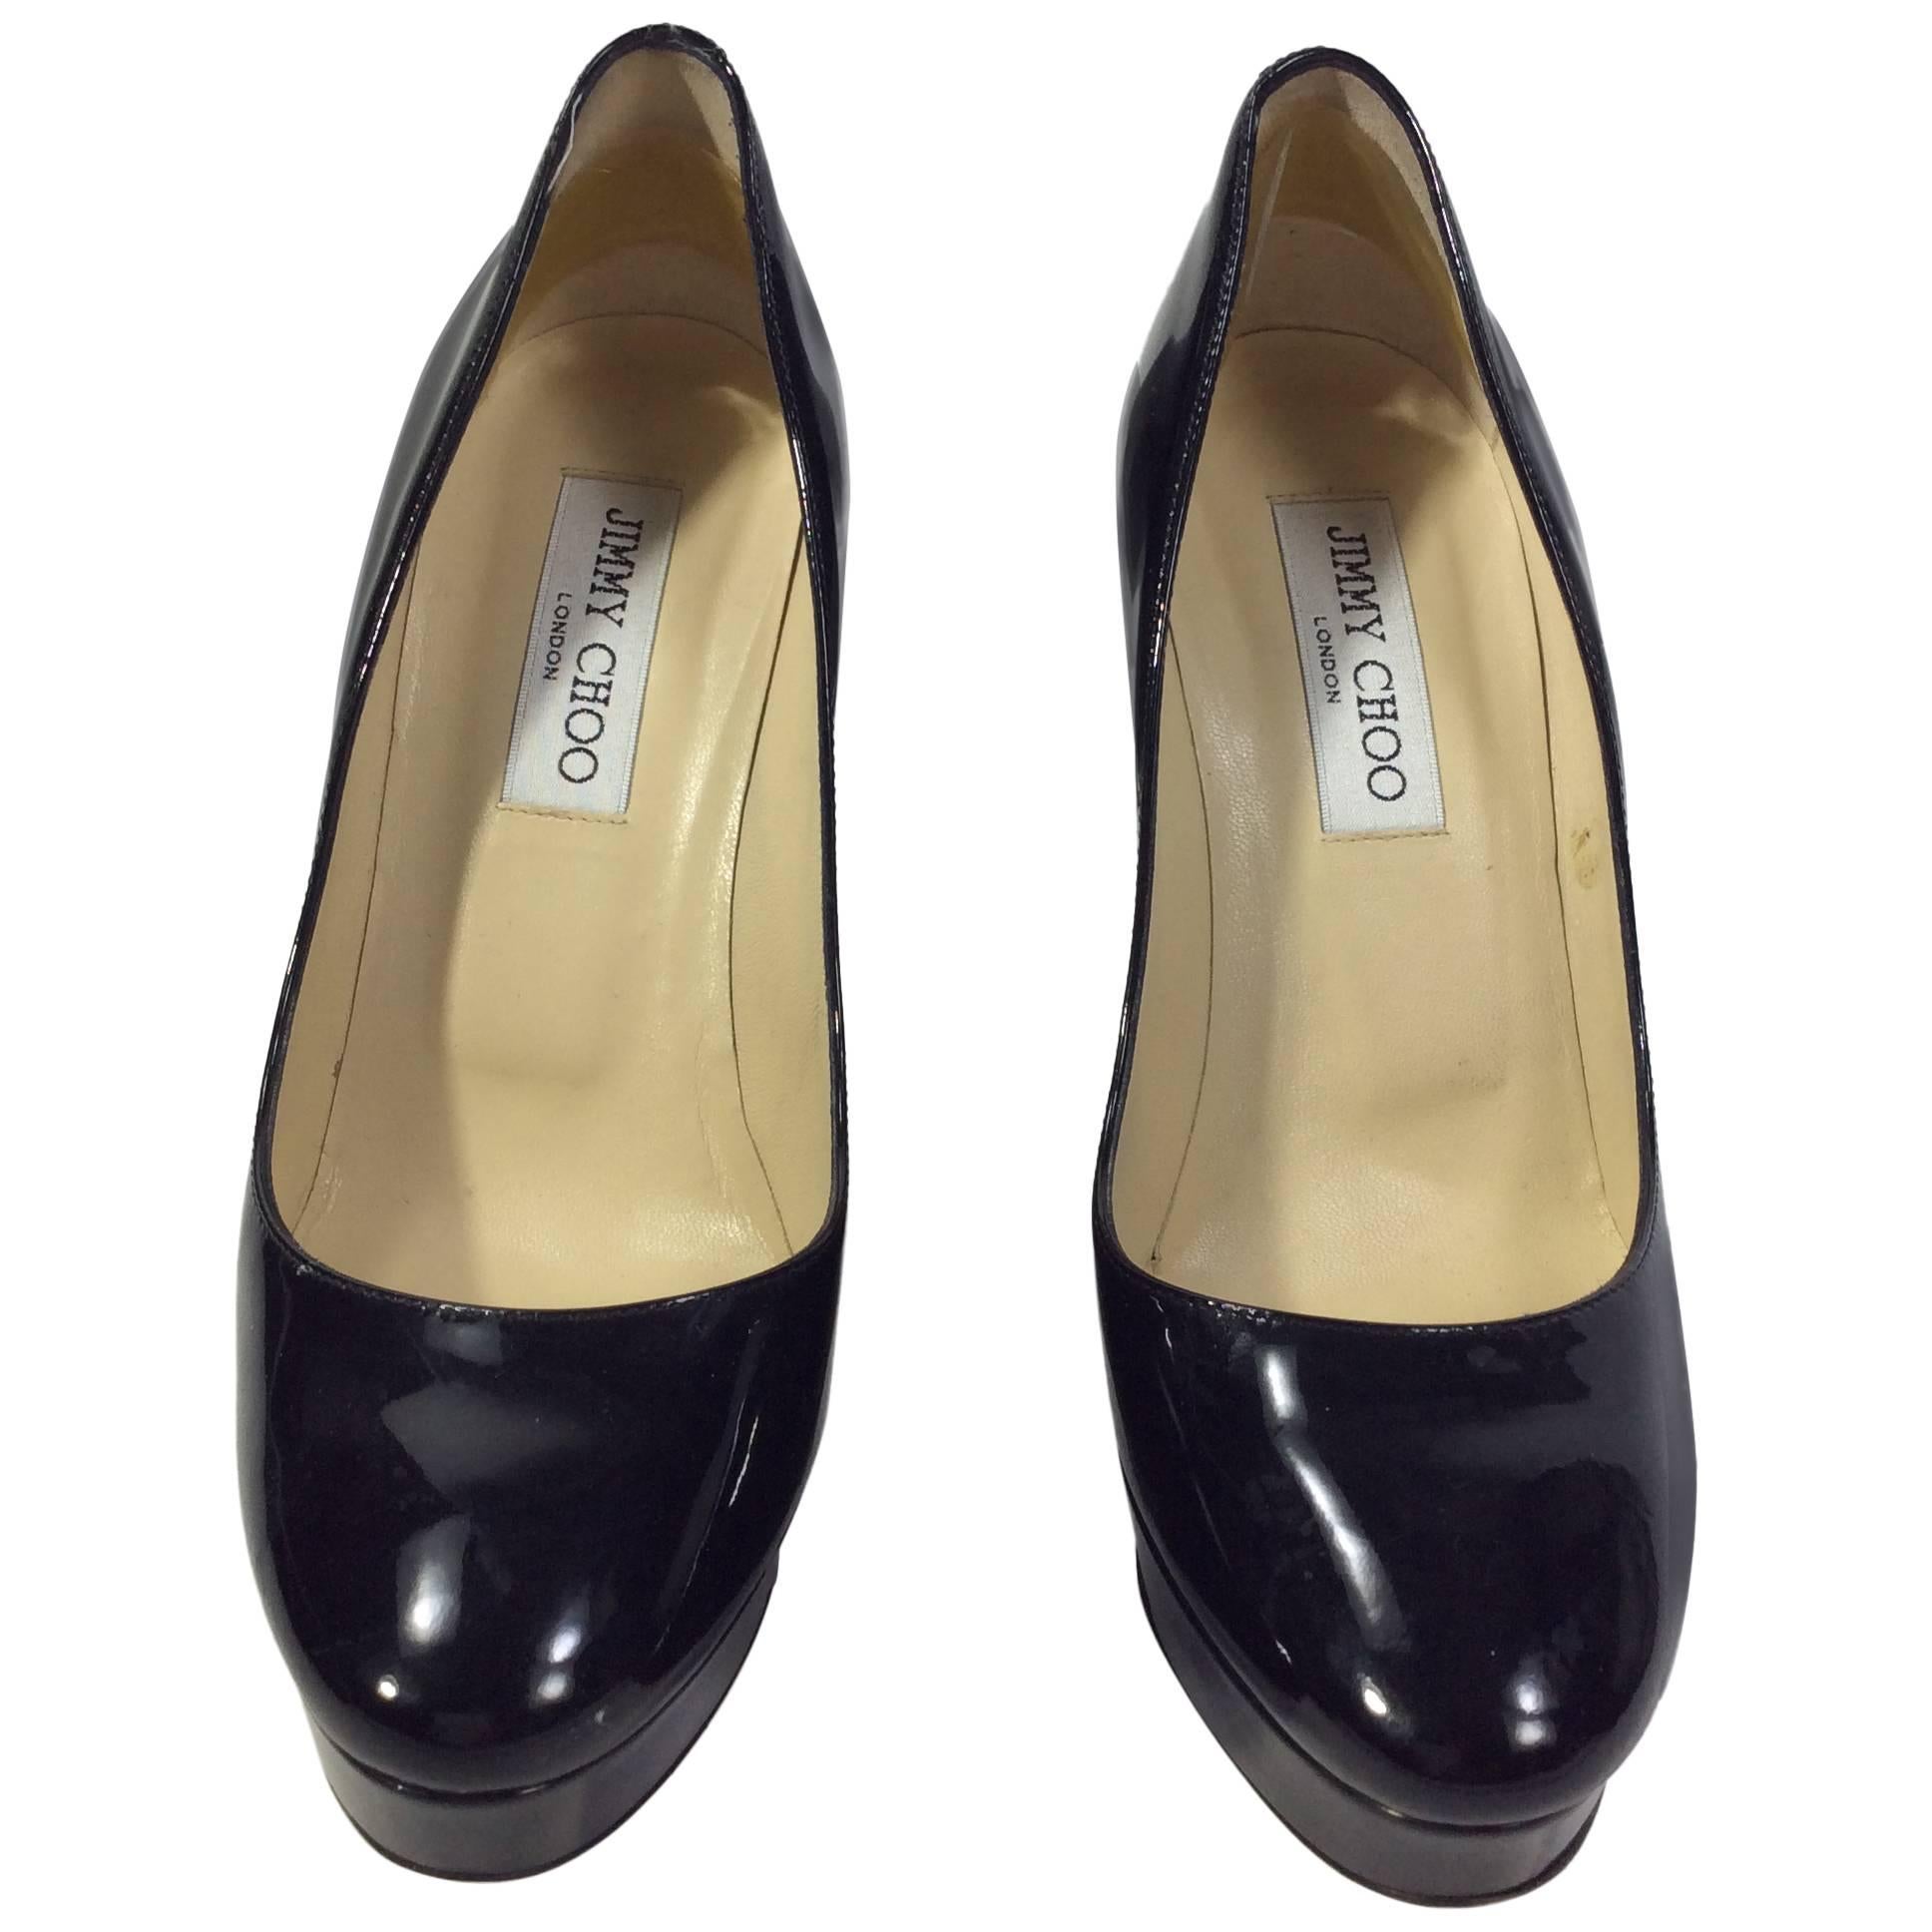 Jimmy Choo Black Patent Pump with Rounded Toe For Sale